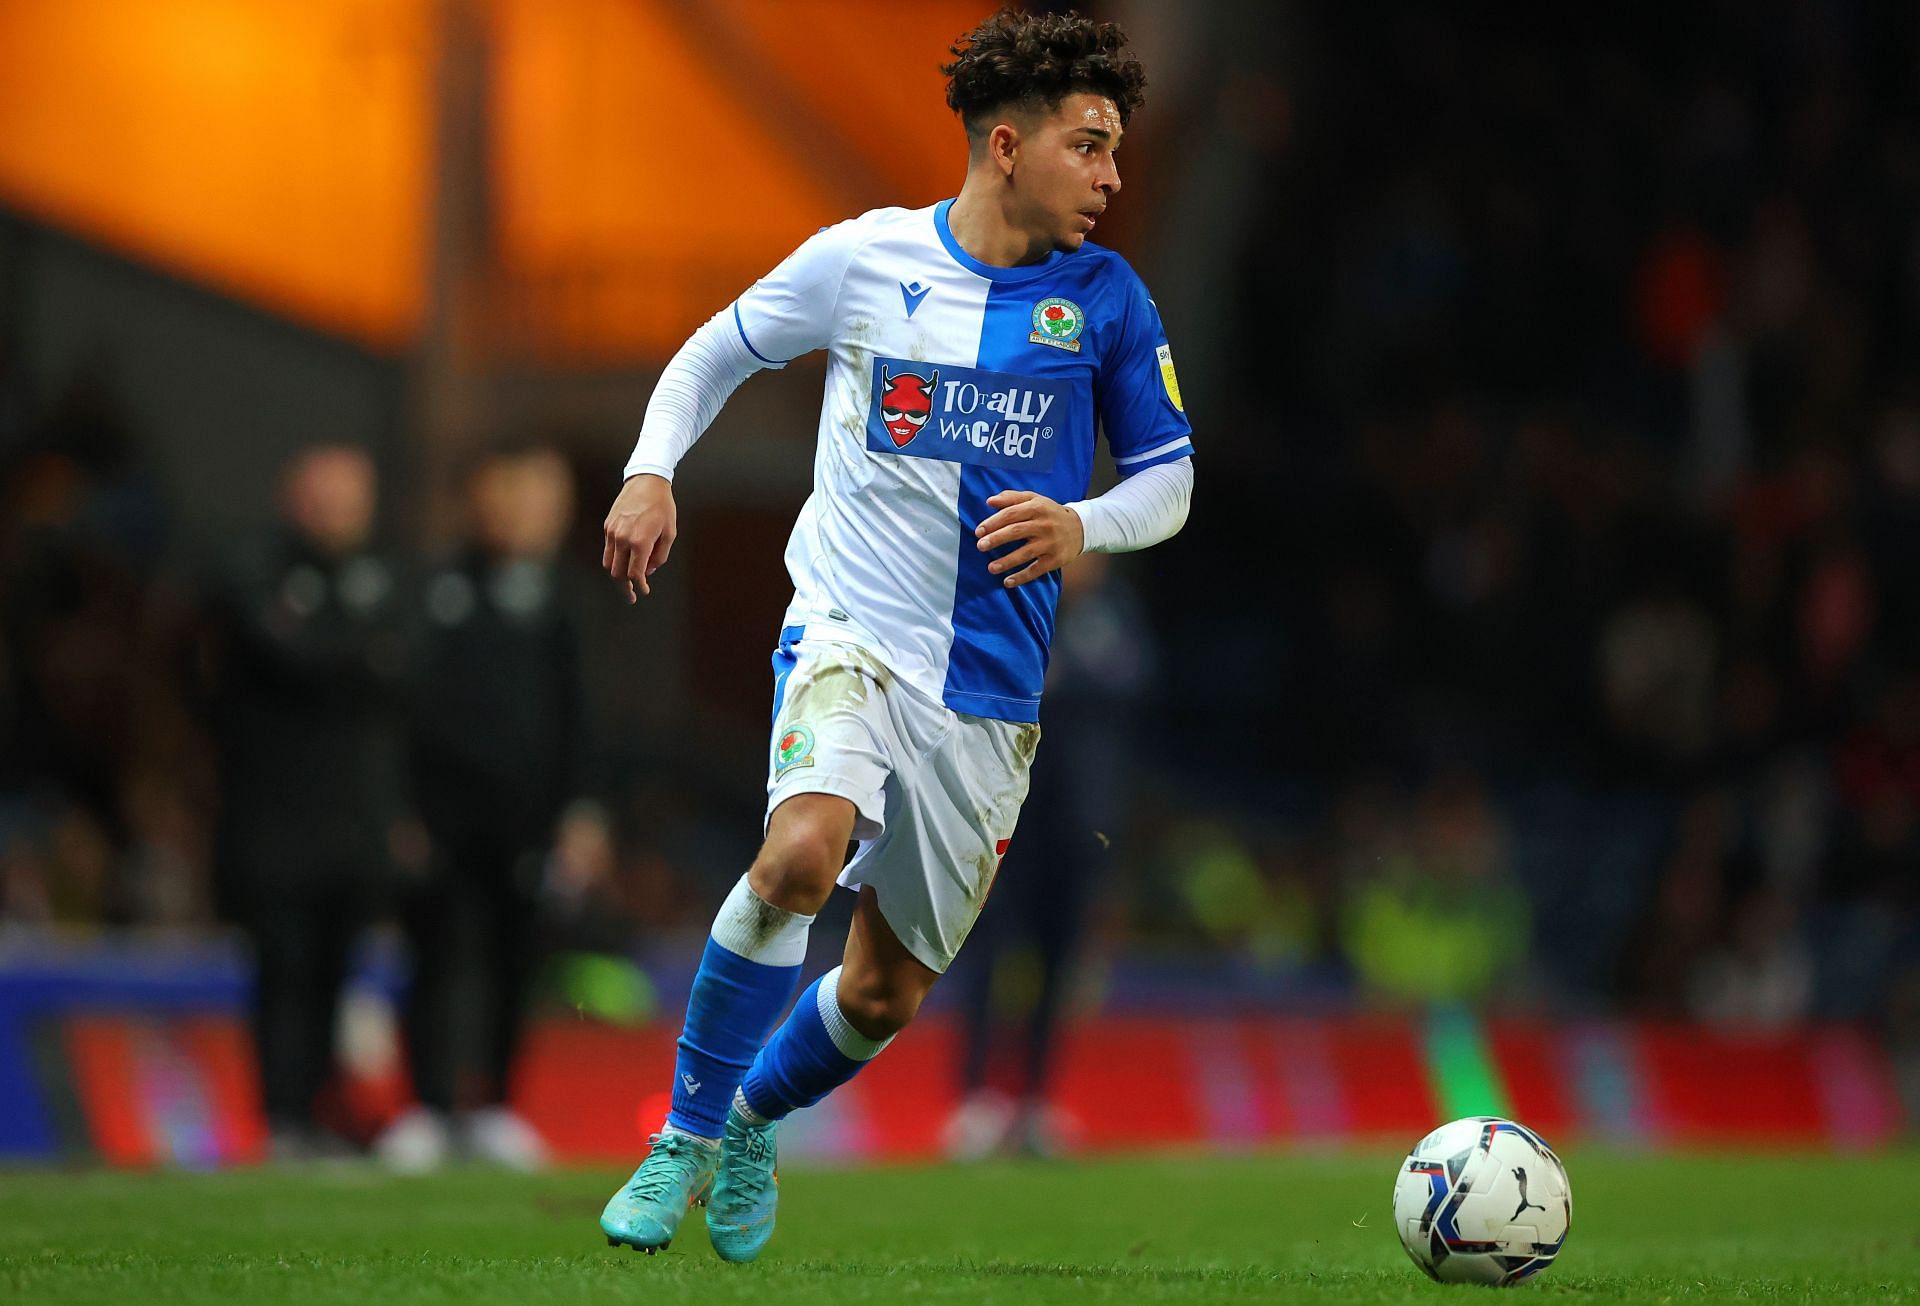 Blackburn Rovers will face Peterborough United on Friday - Sky Bet Championship